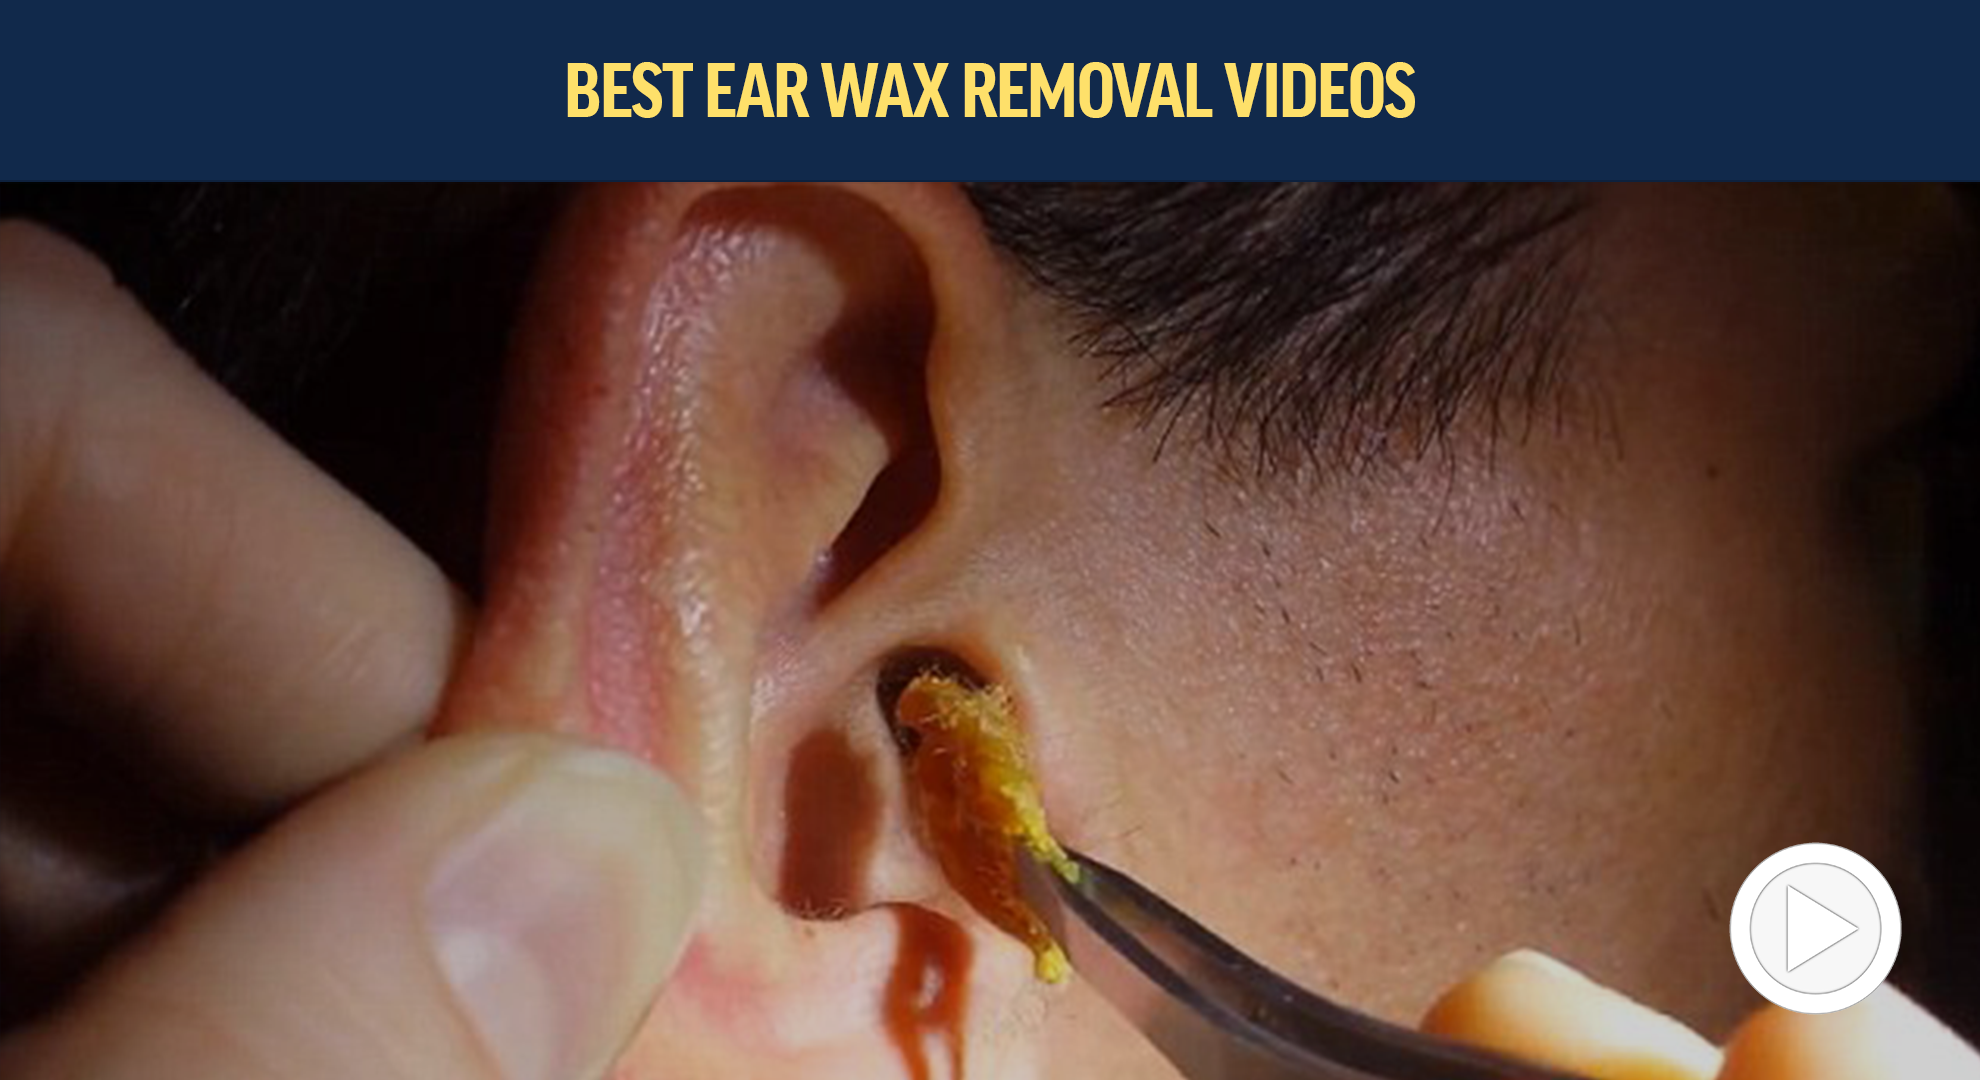 The Do's & Don'ts of Ear Wax Removal